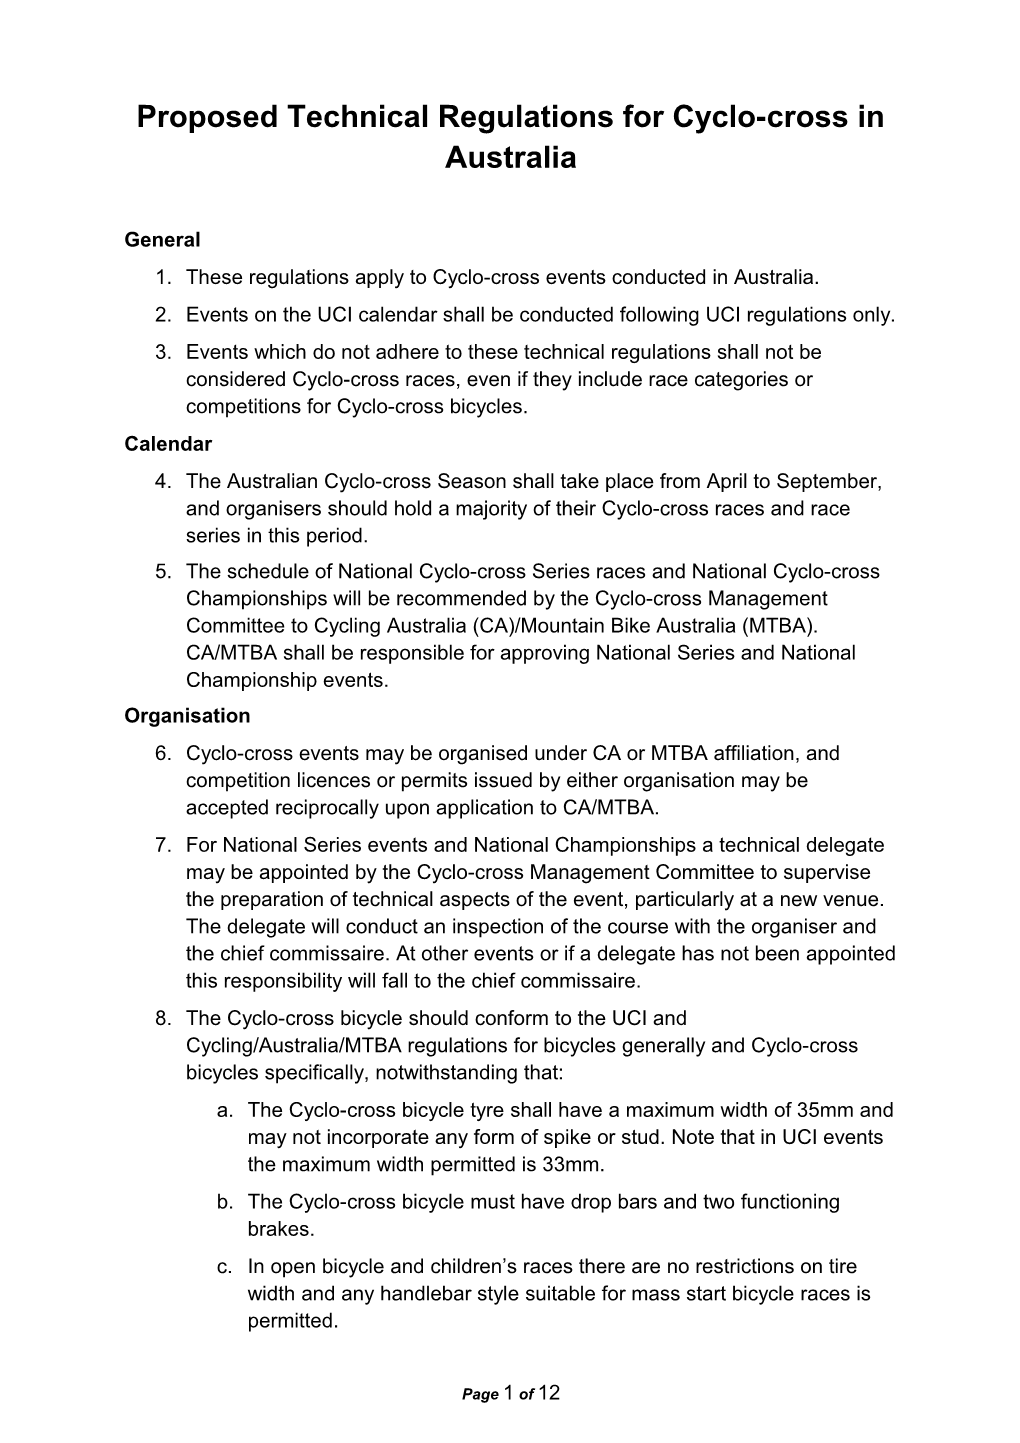 Proposed Technical Regulations for Cyclocross in Australia